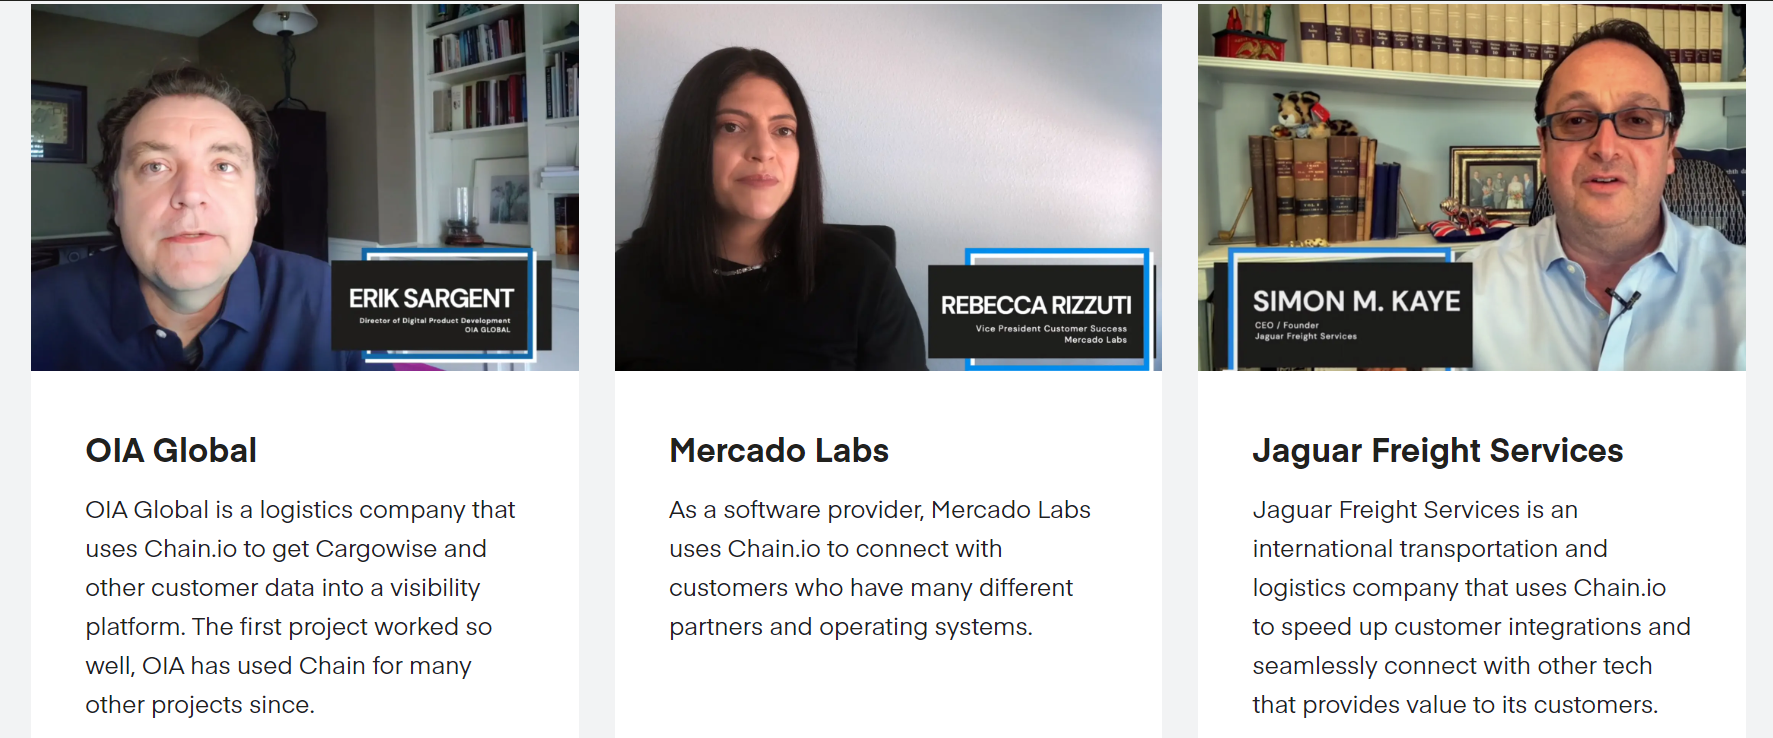 Customer stories preview - images of OIA Global, Mercado Labs, and Jaguar Freight Services Leaders. Our customers share their experiences working with Chain.io.